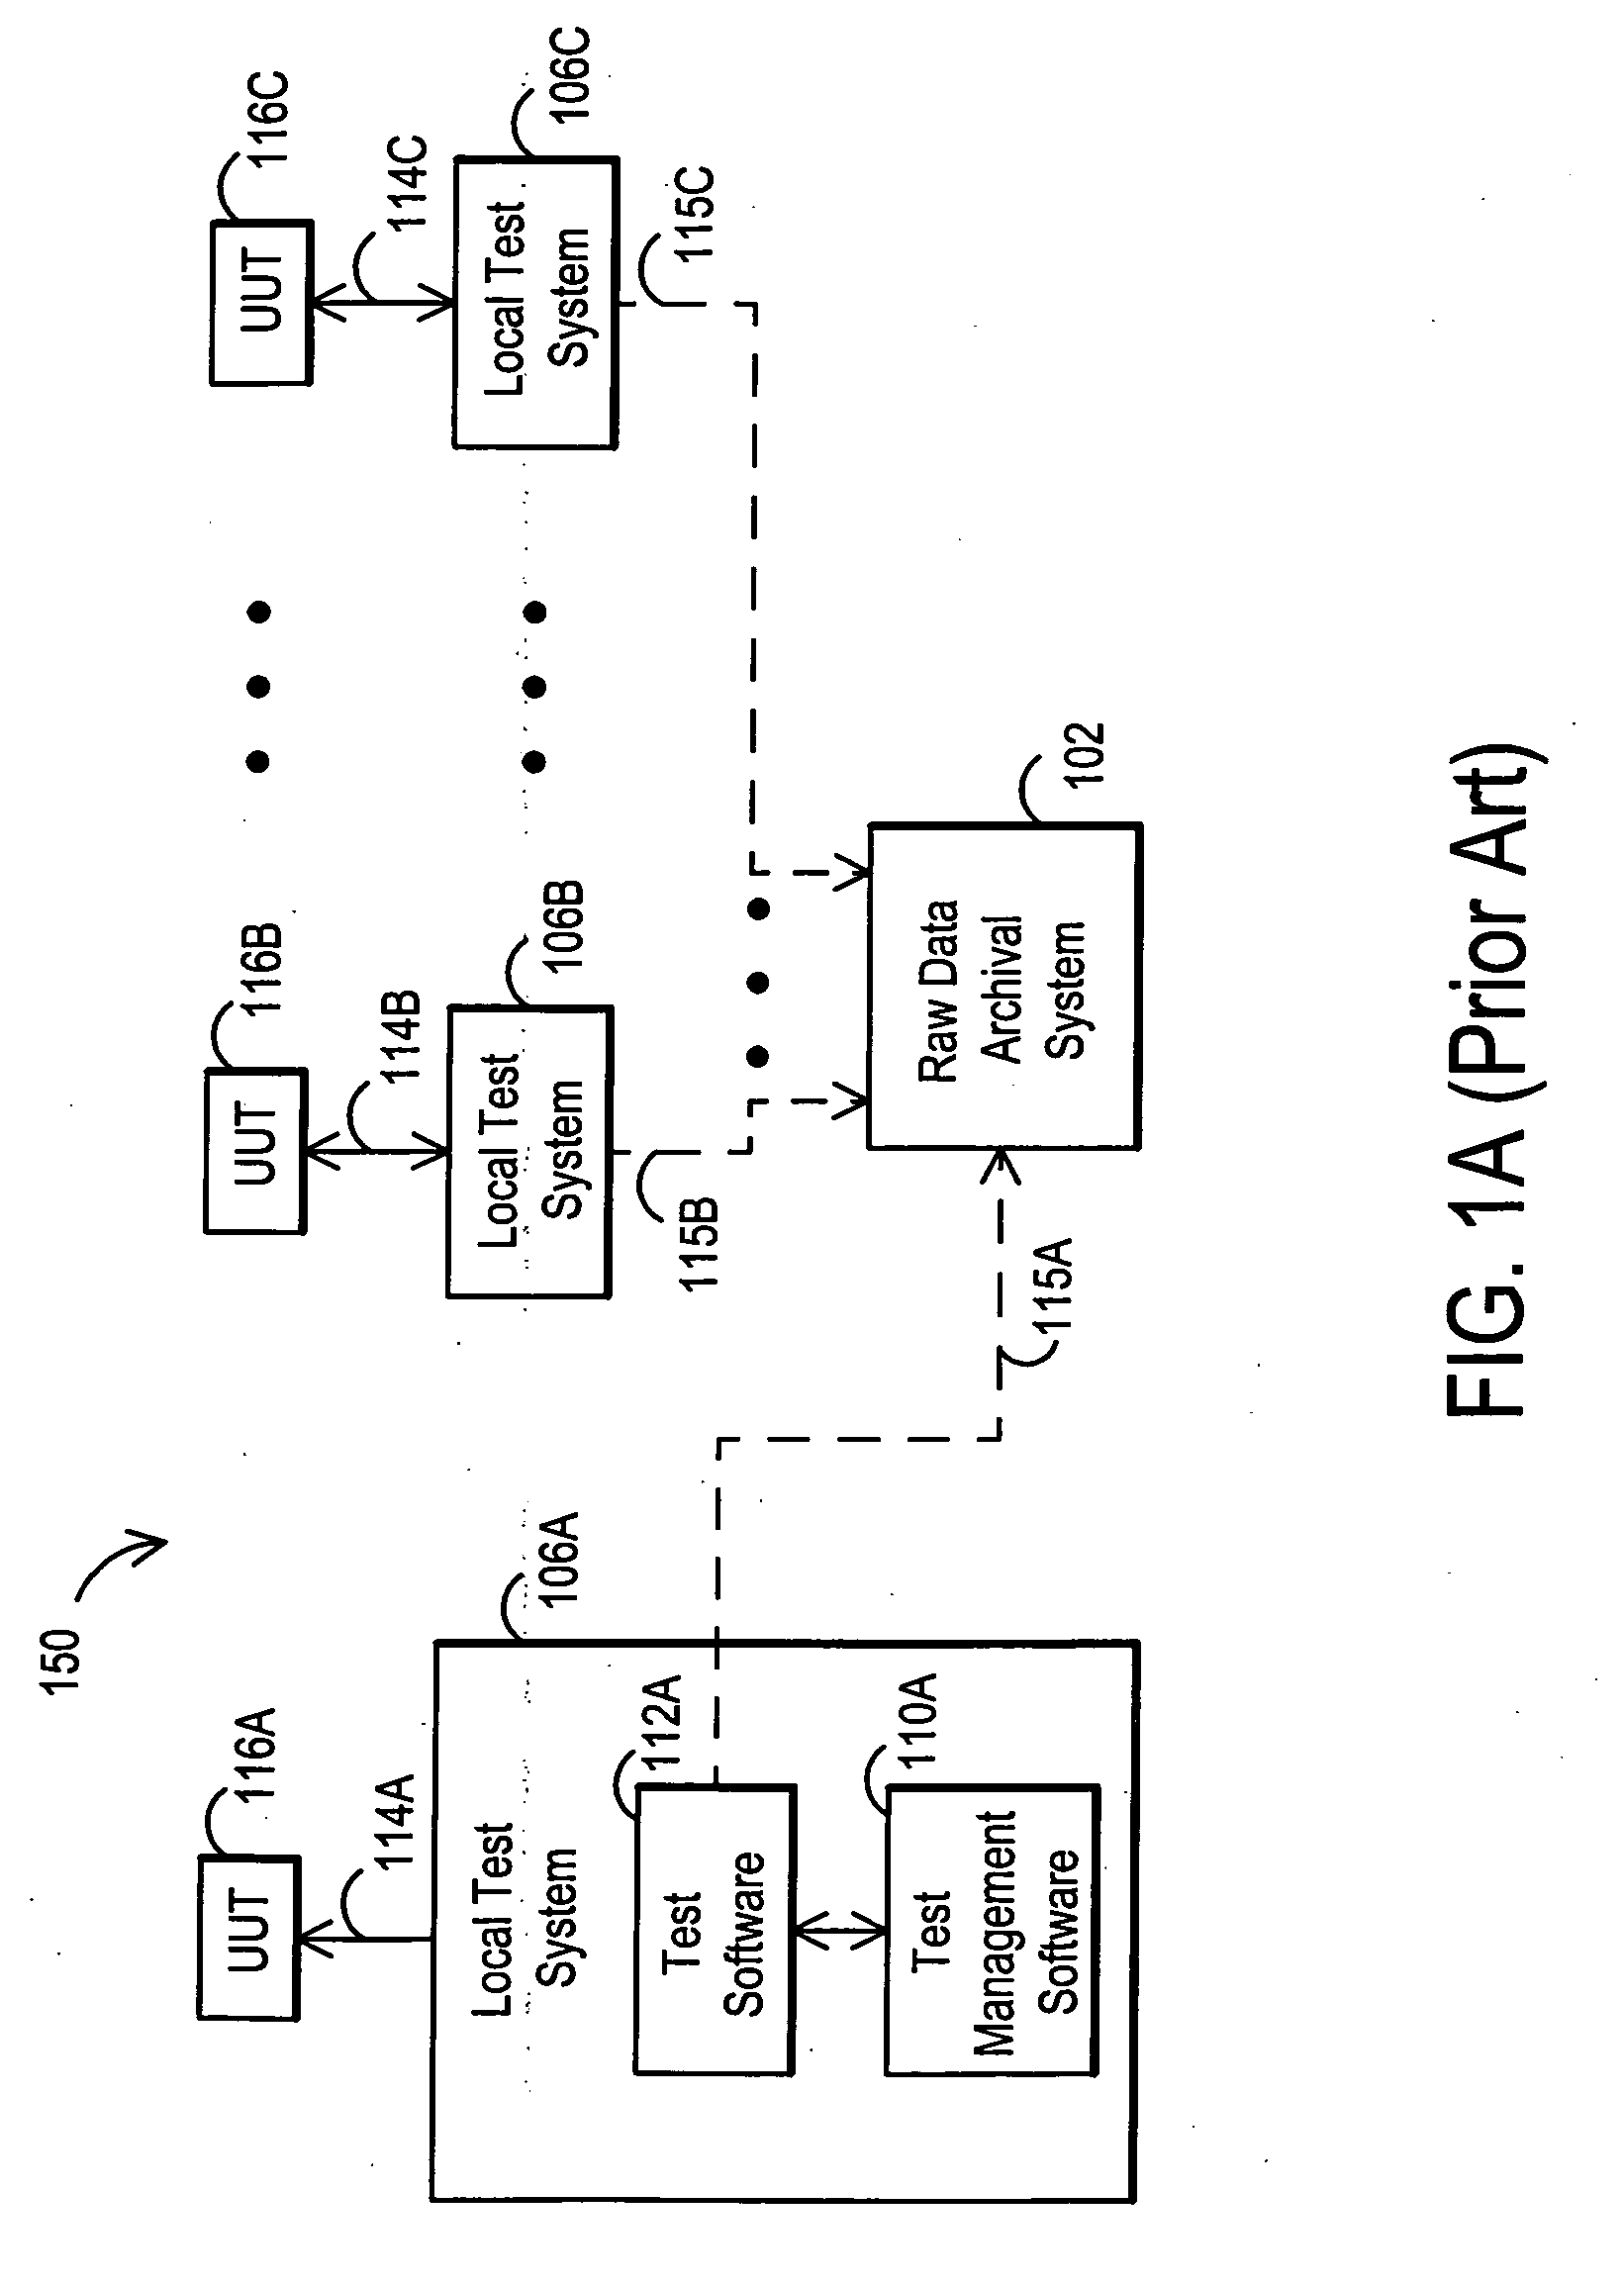 Test configuration and data management system and associated method for enterprise test operations